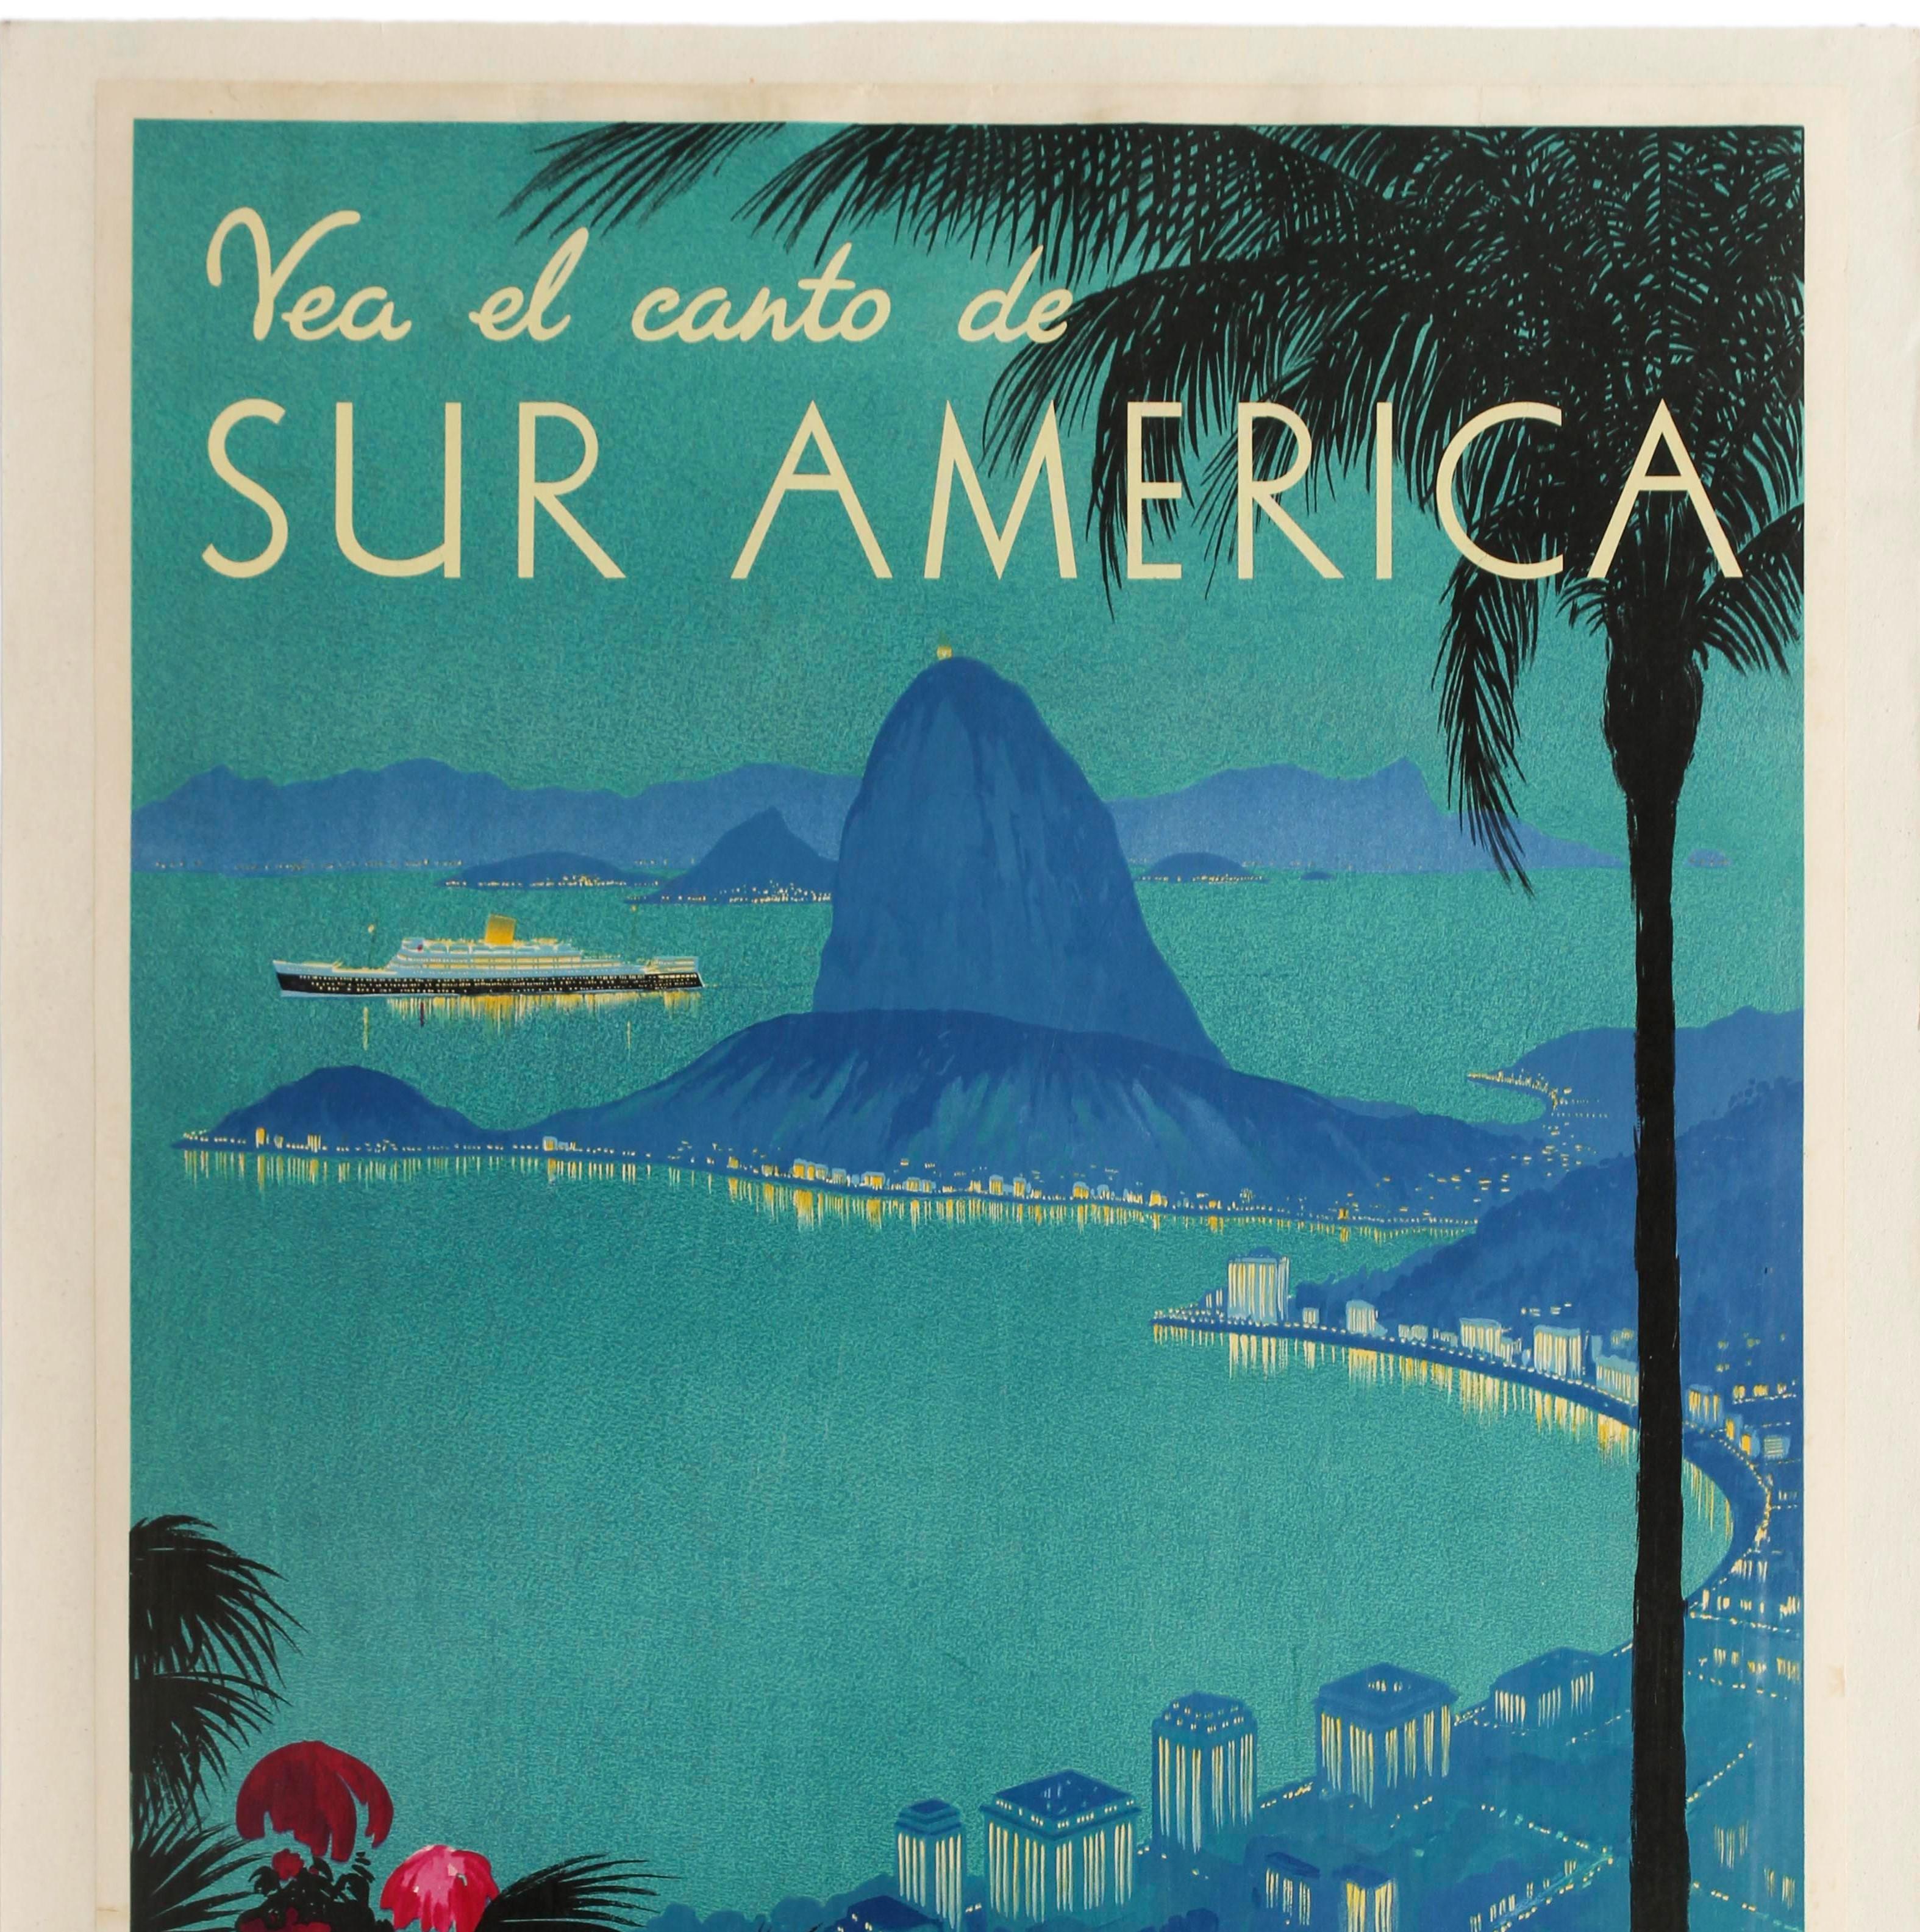 Original vintage Royal Mail cruise travel advertising poster - Vea el canto de Sur America See the Song of South America - featuring a stunning scenic image in shades of blue depicting a view over the Rio de Janeiro city skyline along coast in